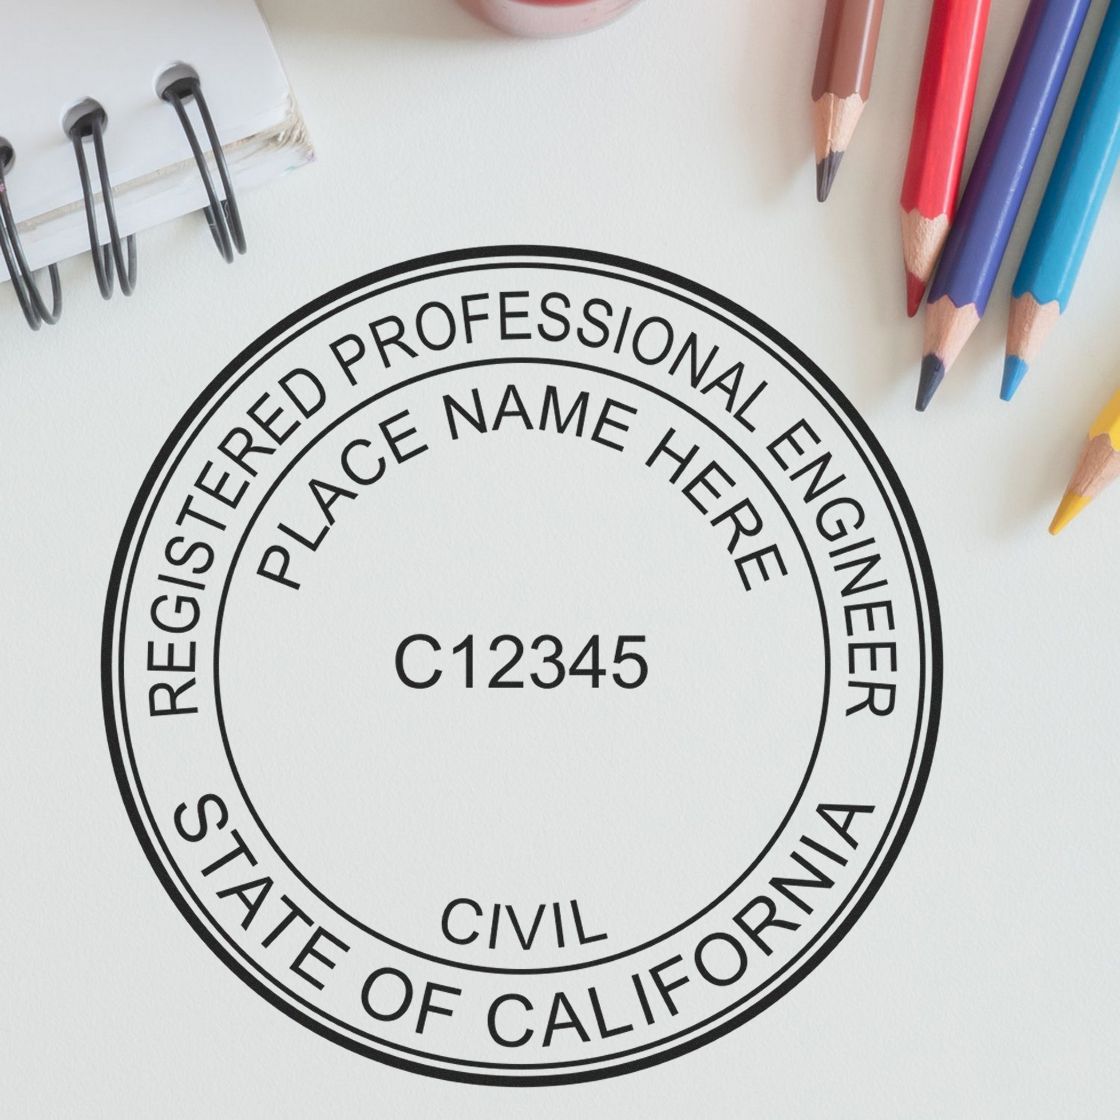 Another Example of a stamped impression of the California Professional Engineer Seal Stamp on a piece of office paper.